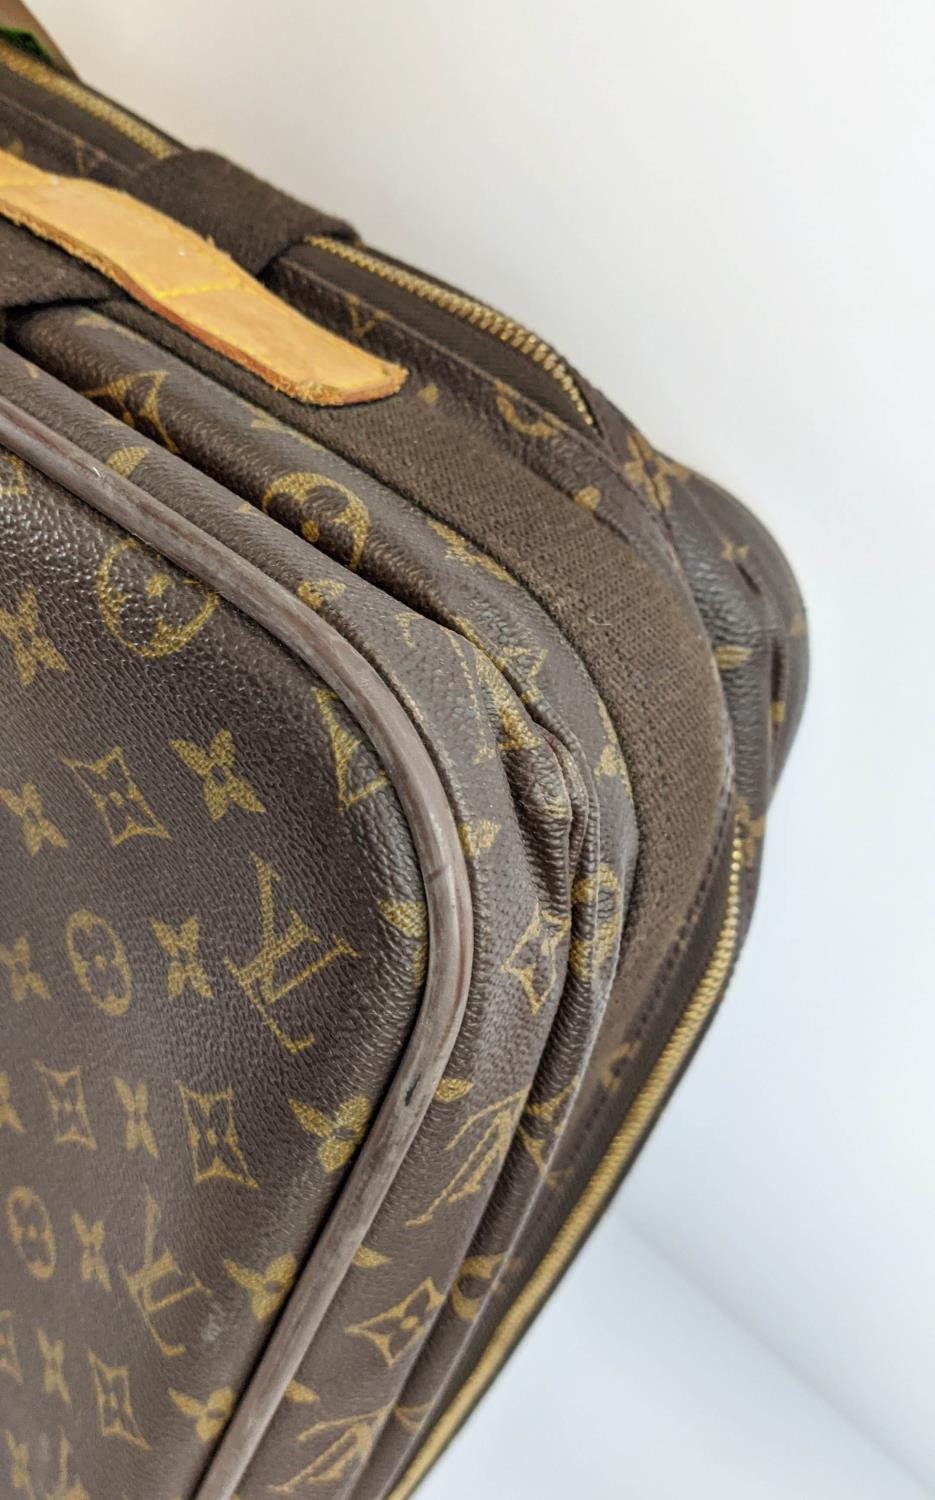 LOUIS VUITTON SATELLITE 70 SUITCASE, monogram canvas and leather, brass hardware, double buckle - Image 5 of 12